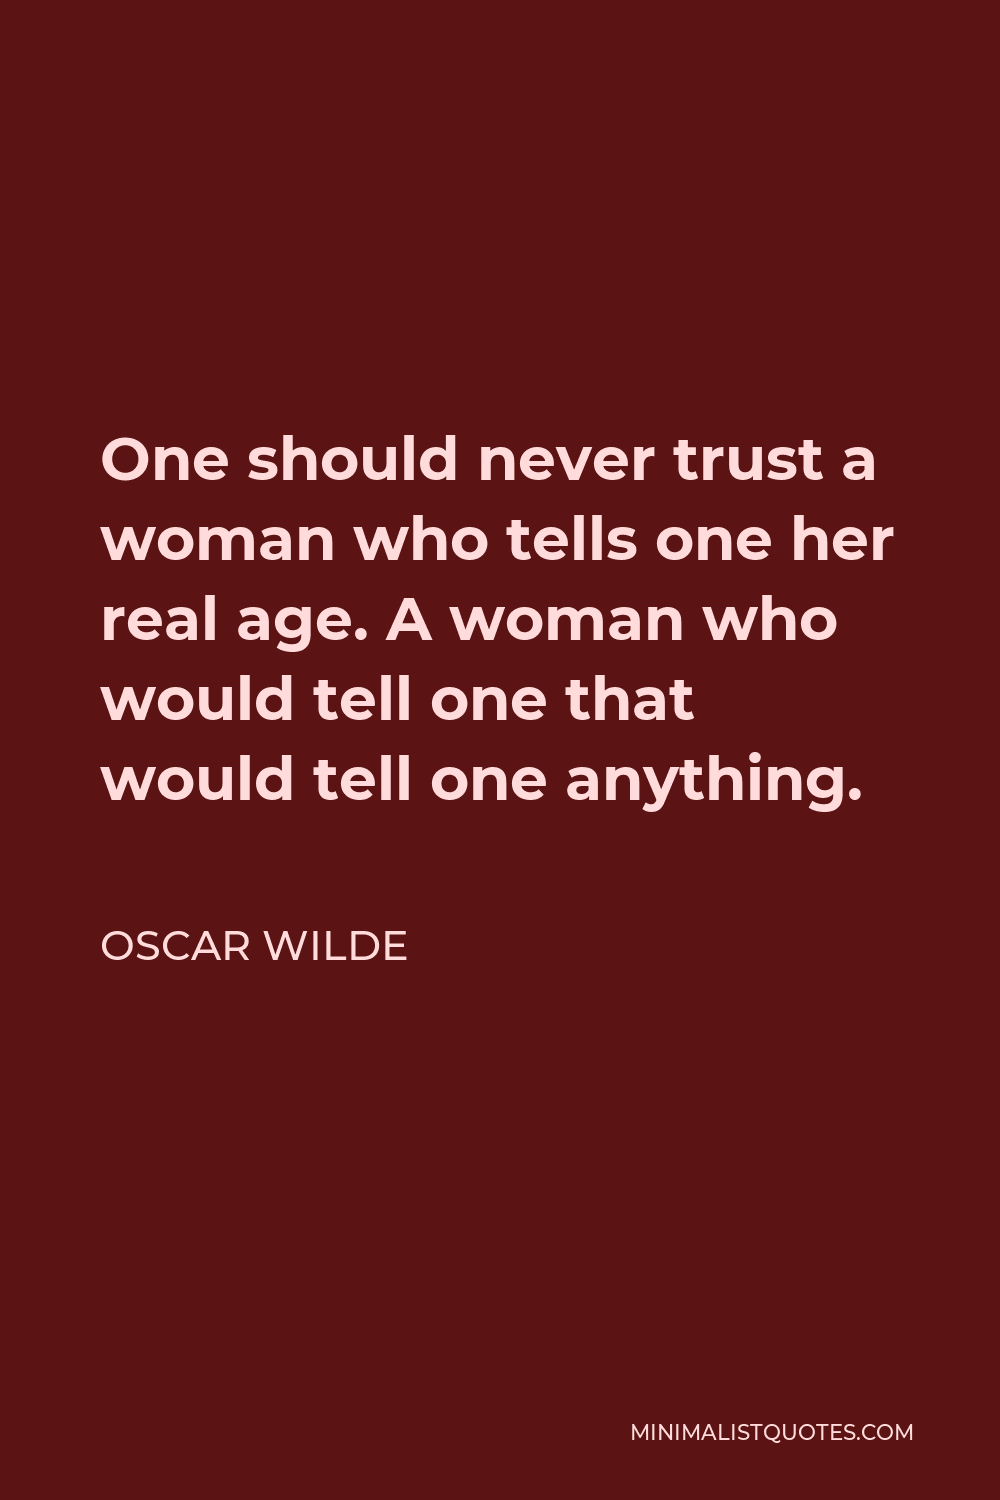 Oscar Wilde Quote - One should never trust a woman who tells one her real age. A woman who would tell one that would tell one anything.